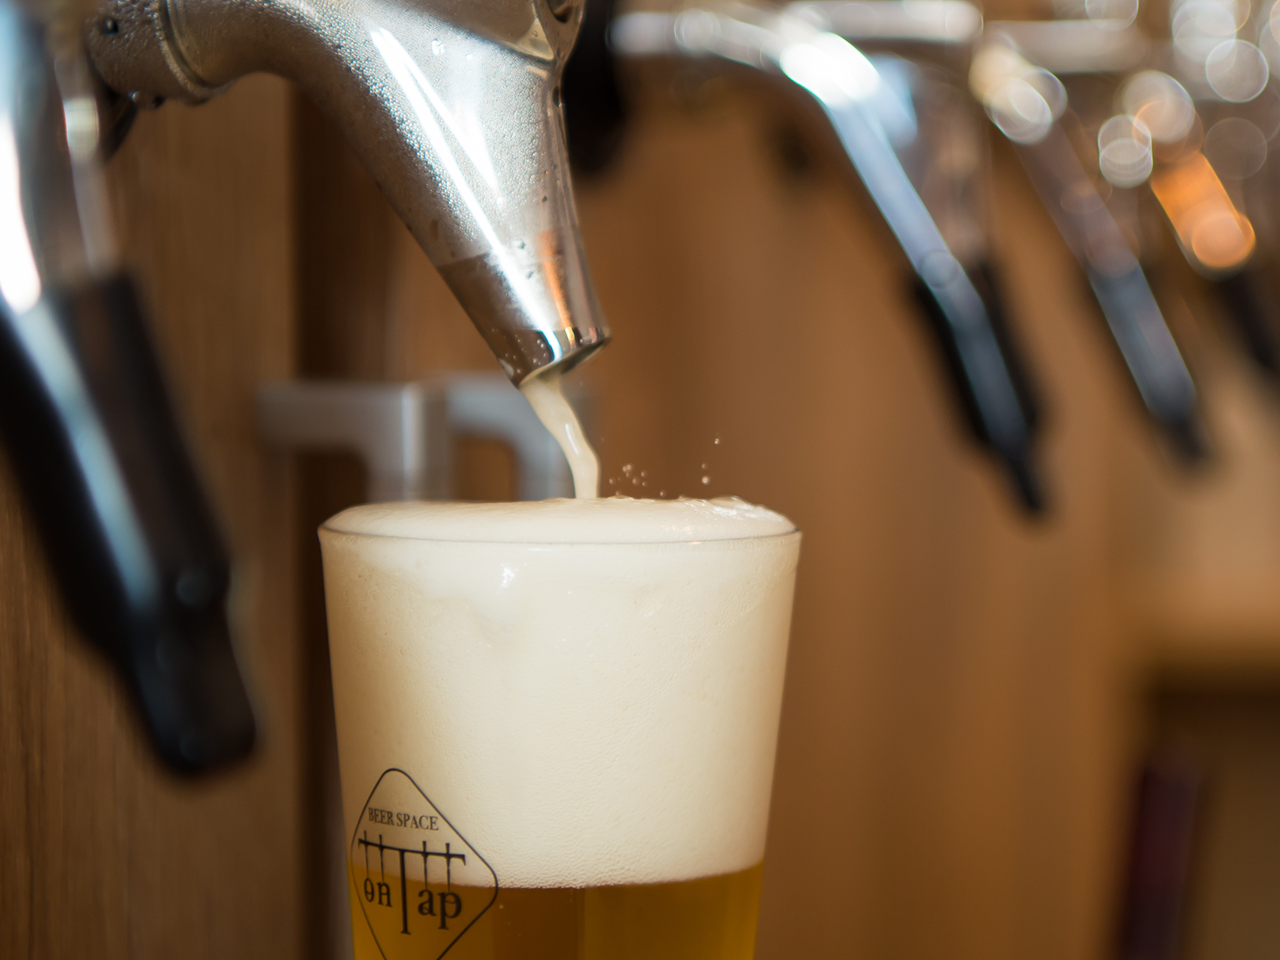 BEER SPACE　on Tap